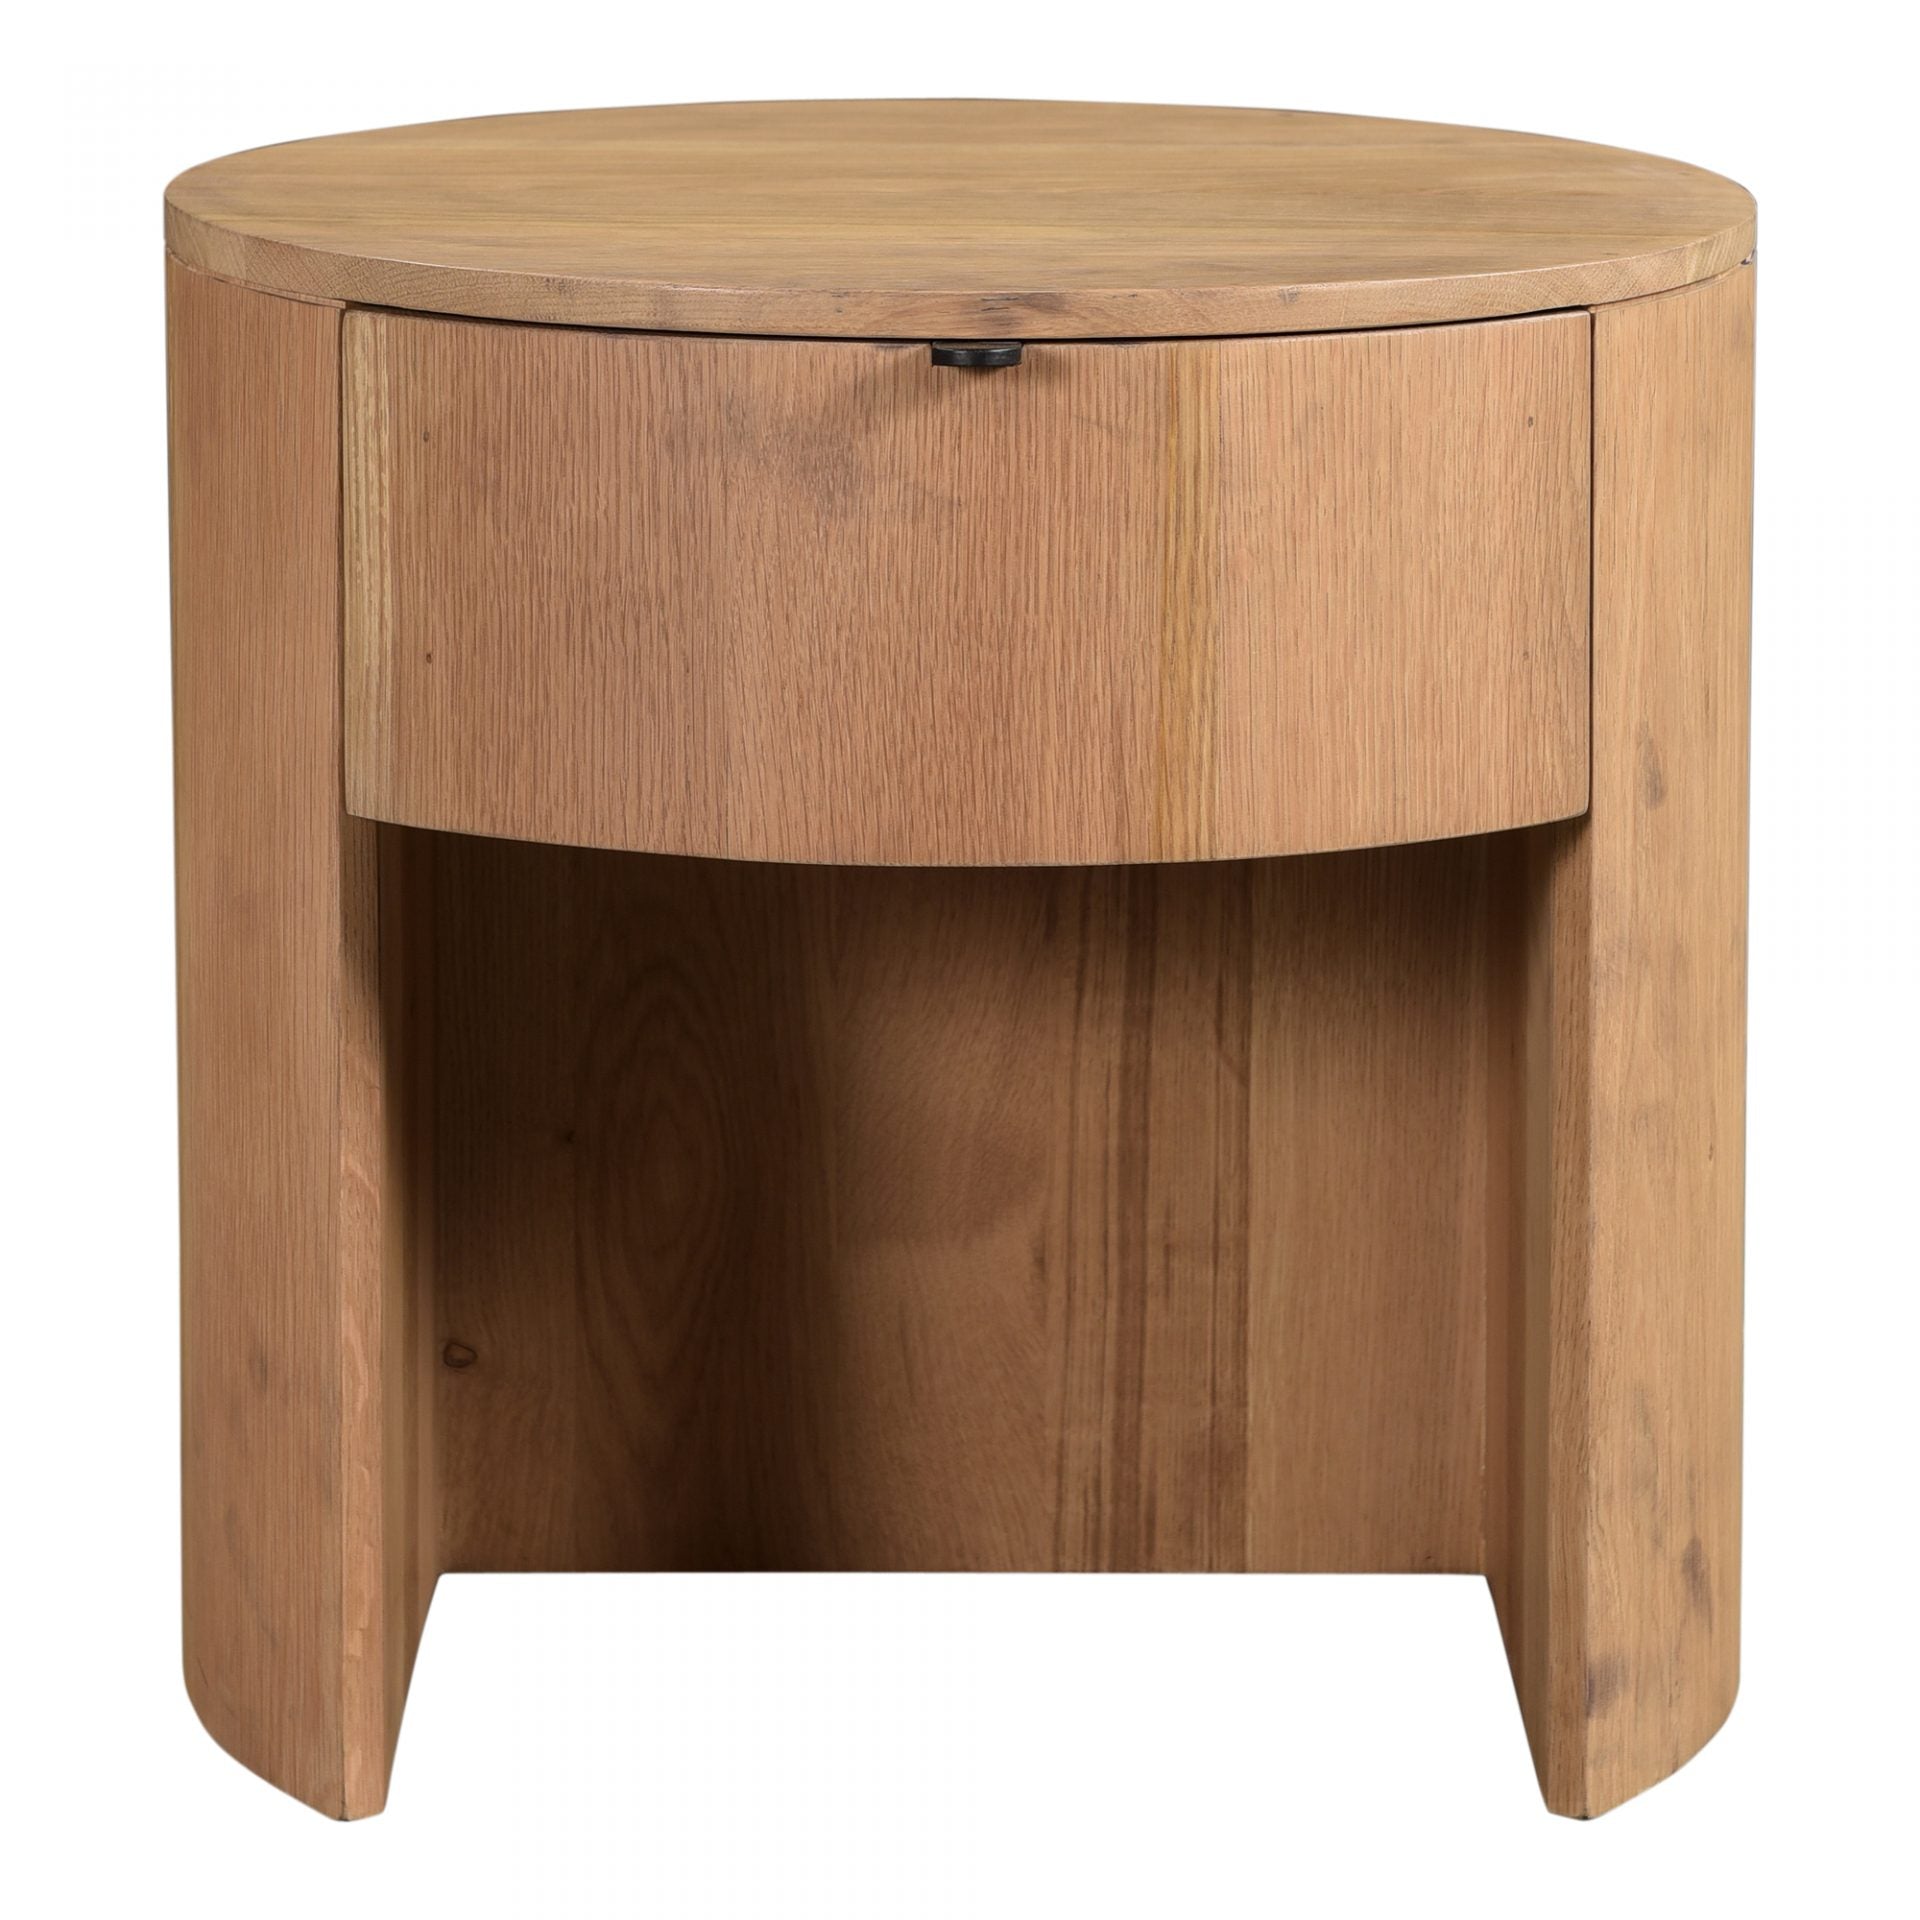 Made from solid oak and a natural finish, the Theo Nightsand gives us all the natural, earthy vibes. The drawer makes this an extremely function, contemporary piece to add to your room.   Size: 19"W x 19"D x 18.5"H Material: Solid Oak